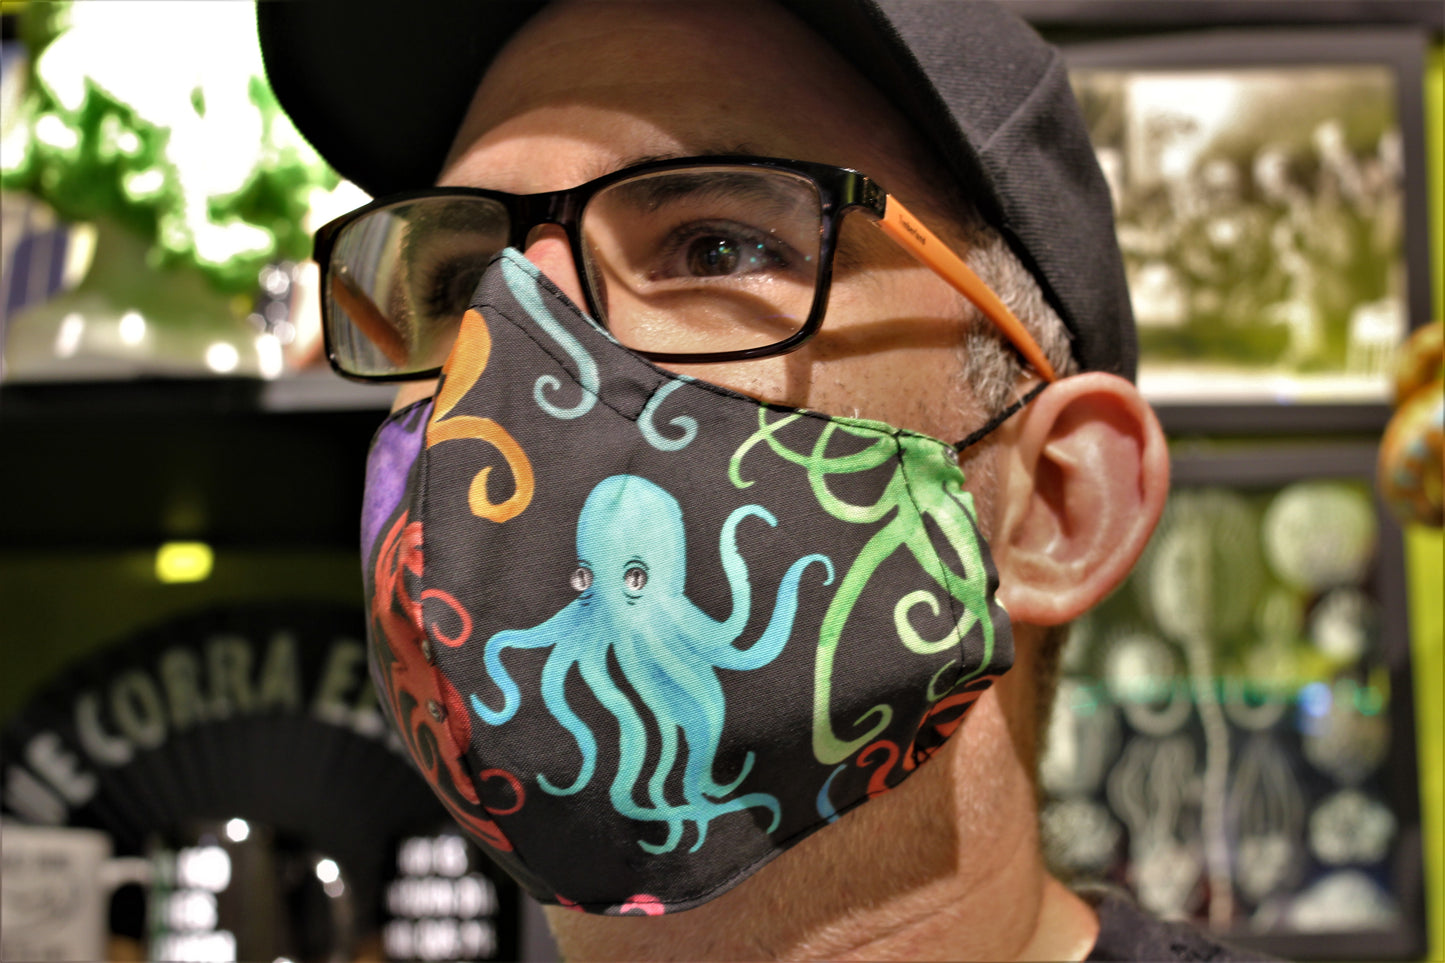 Octopus mask Reusable with filter pocket